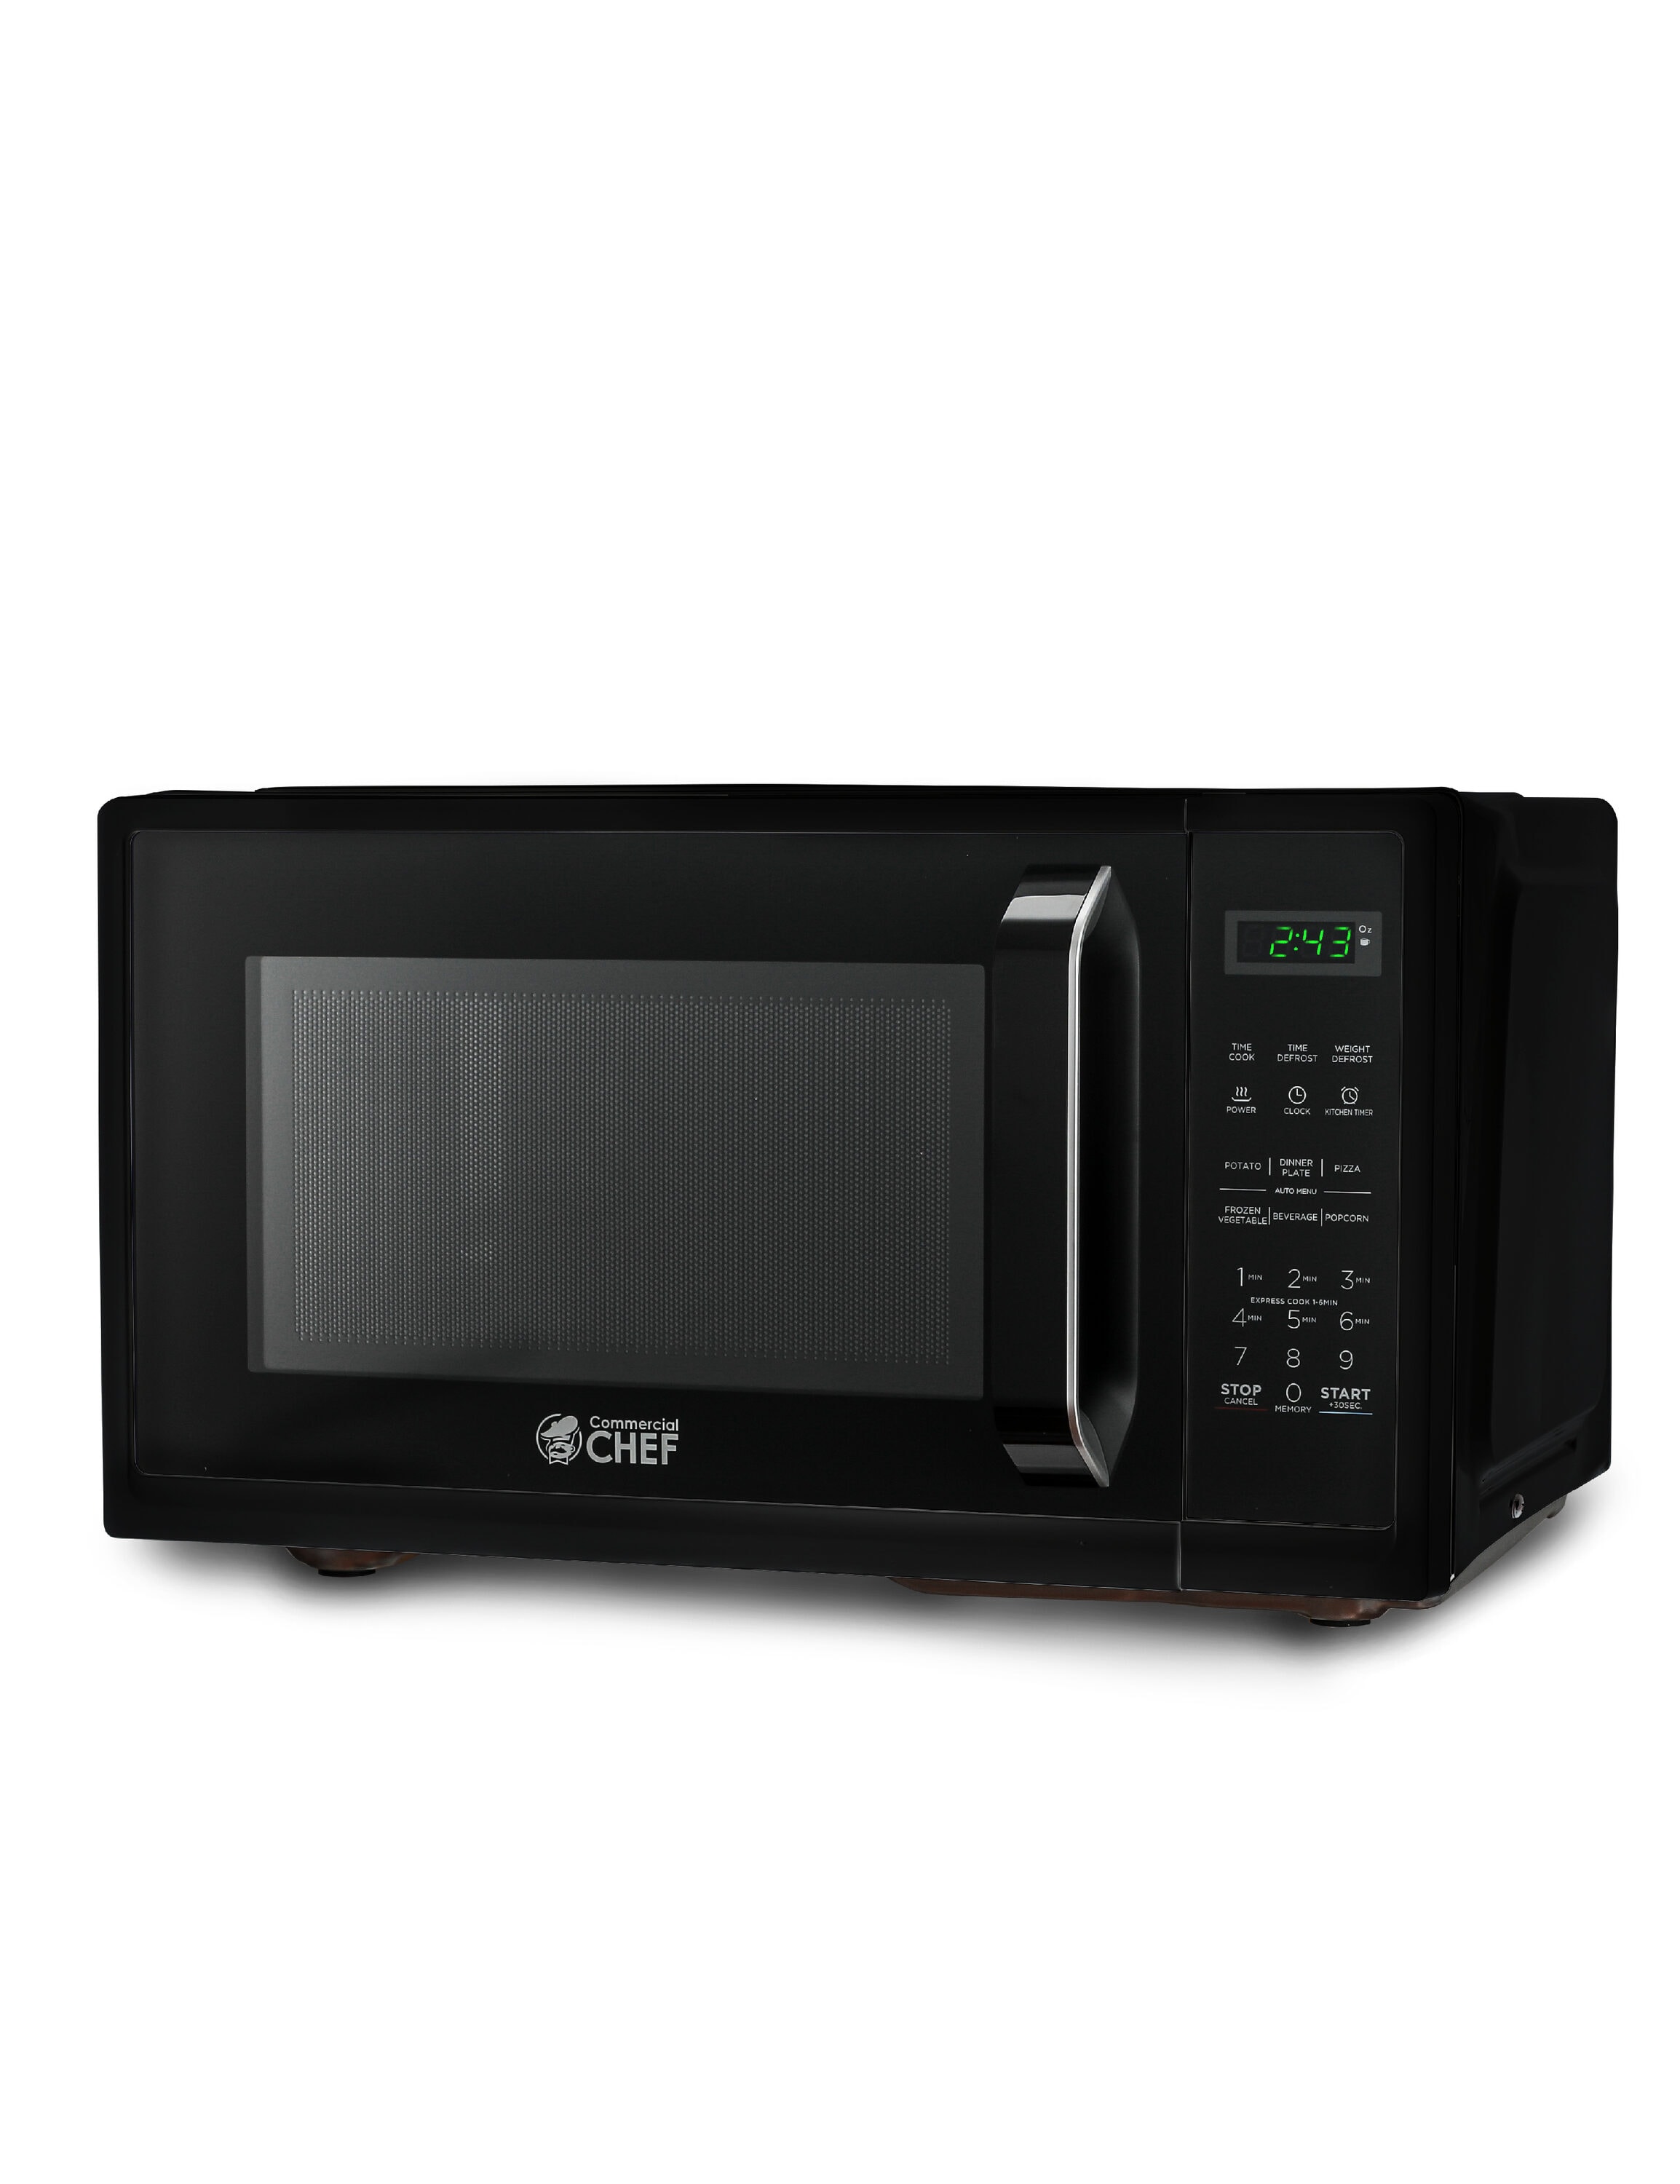  GE Countertop Microwave Oven, 0.9 Cubic Feet Capacity, 900  Watts, Kitchen Essentials for the Countertop or Dorm Room